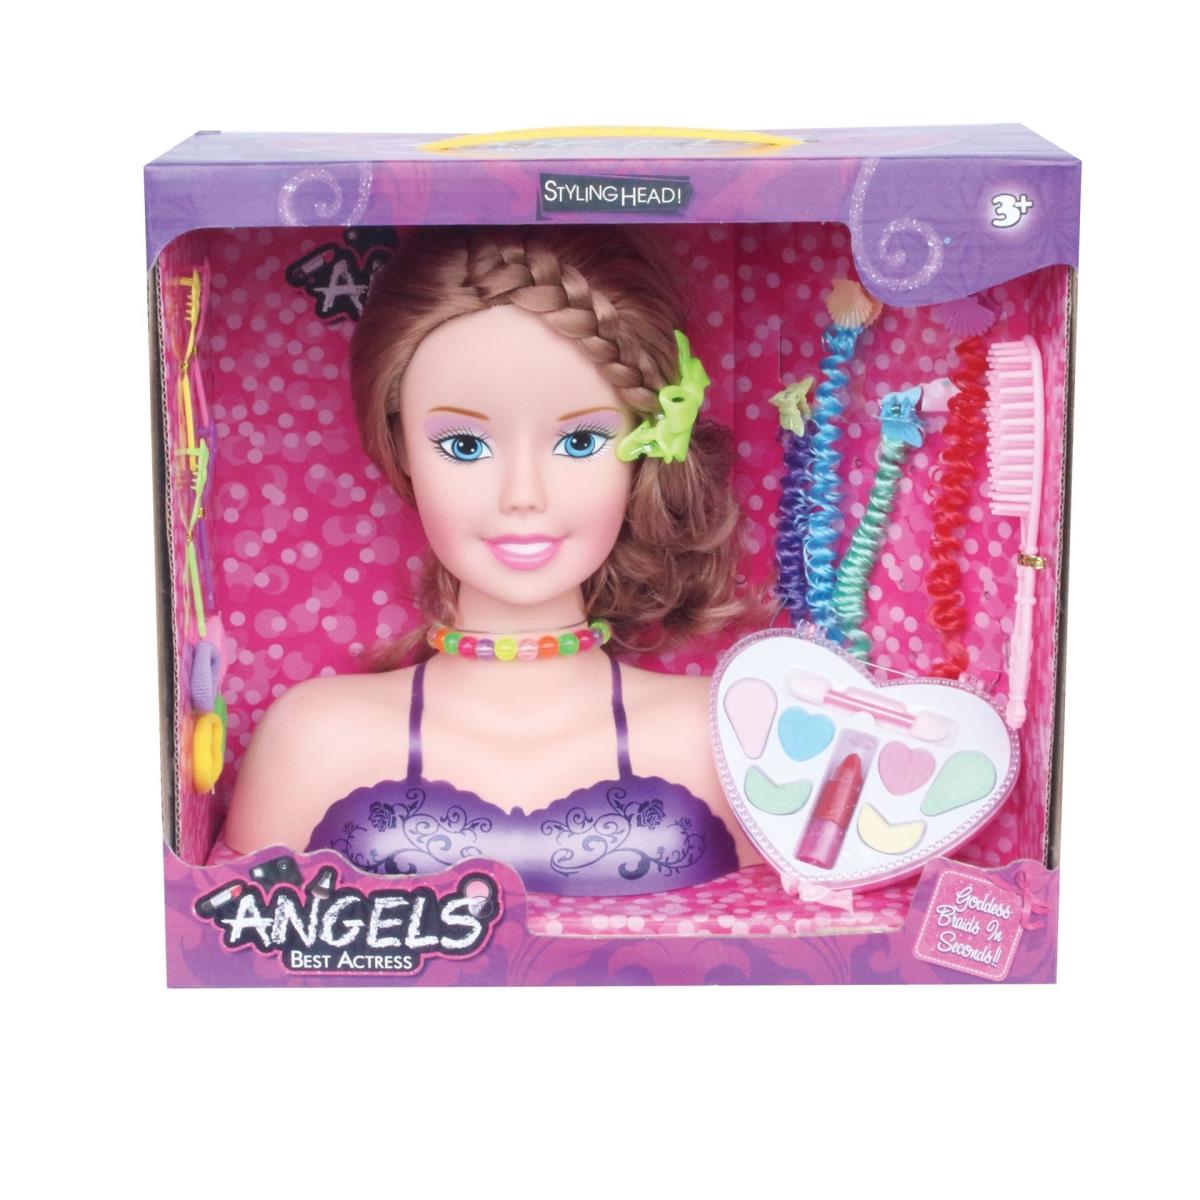 Pshfm Princess Styling Head Playset With Fashion Accessories